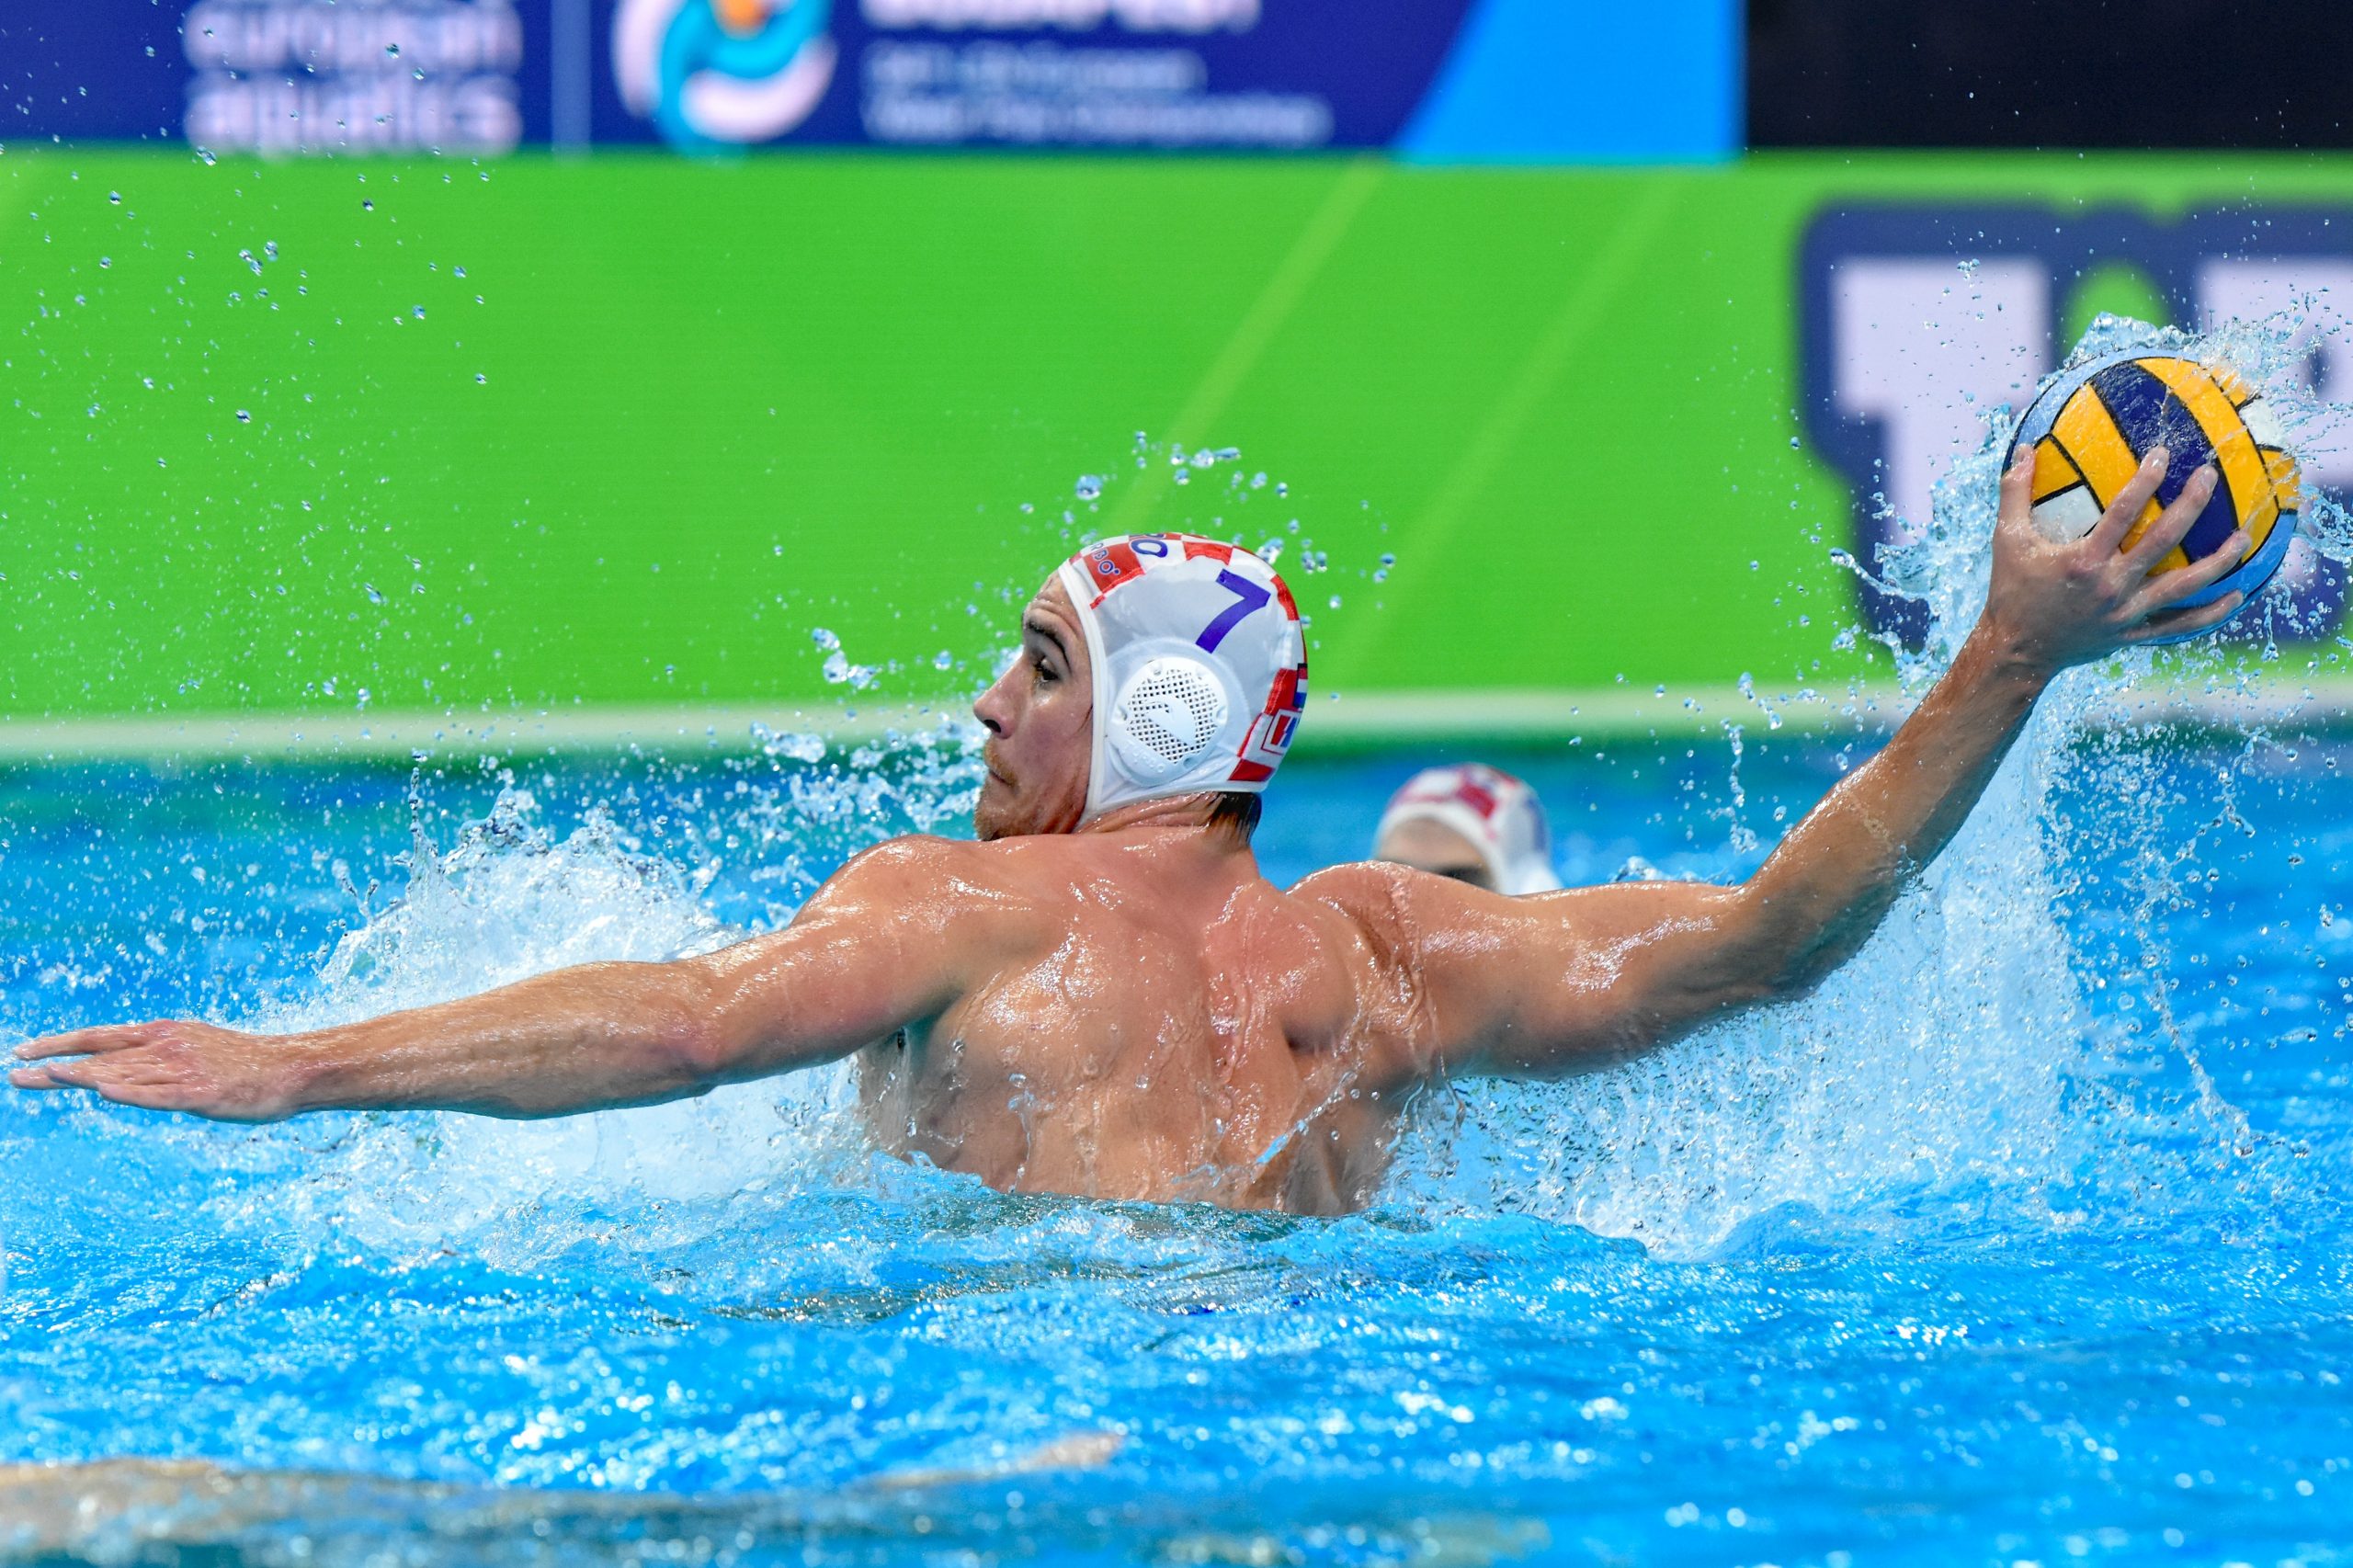 Croatia to play for bronze medal at European Water Polo Champs